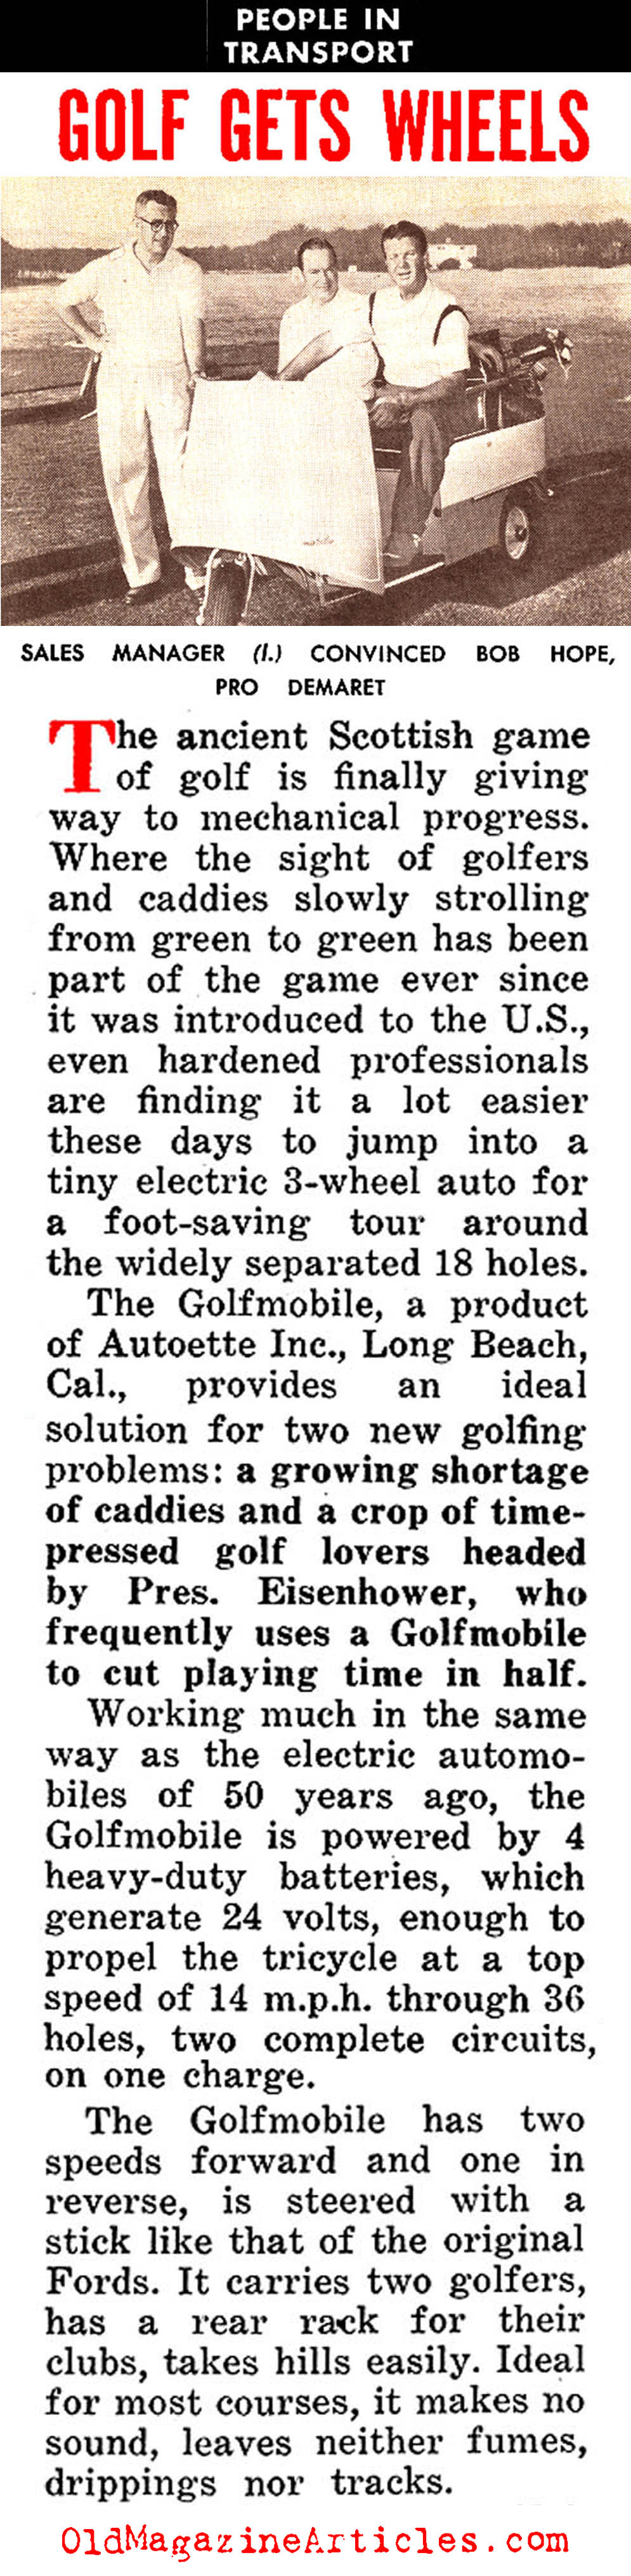 Golf Gets Easier... (People Today, 1954)